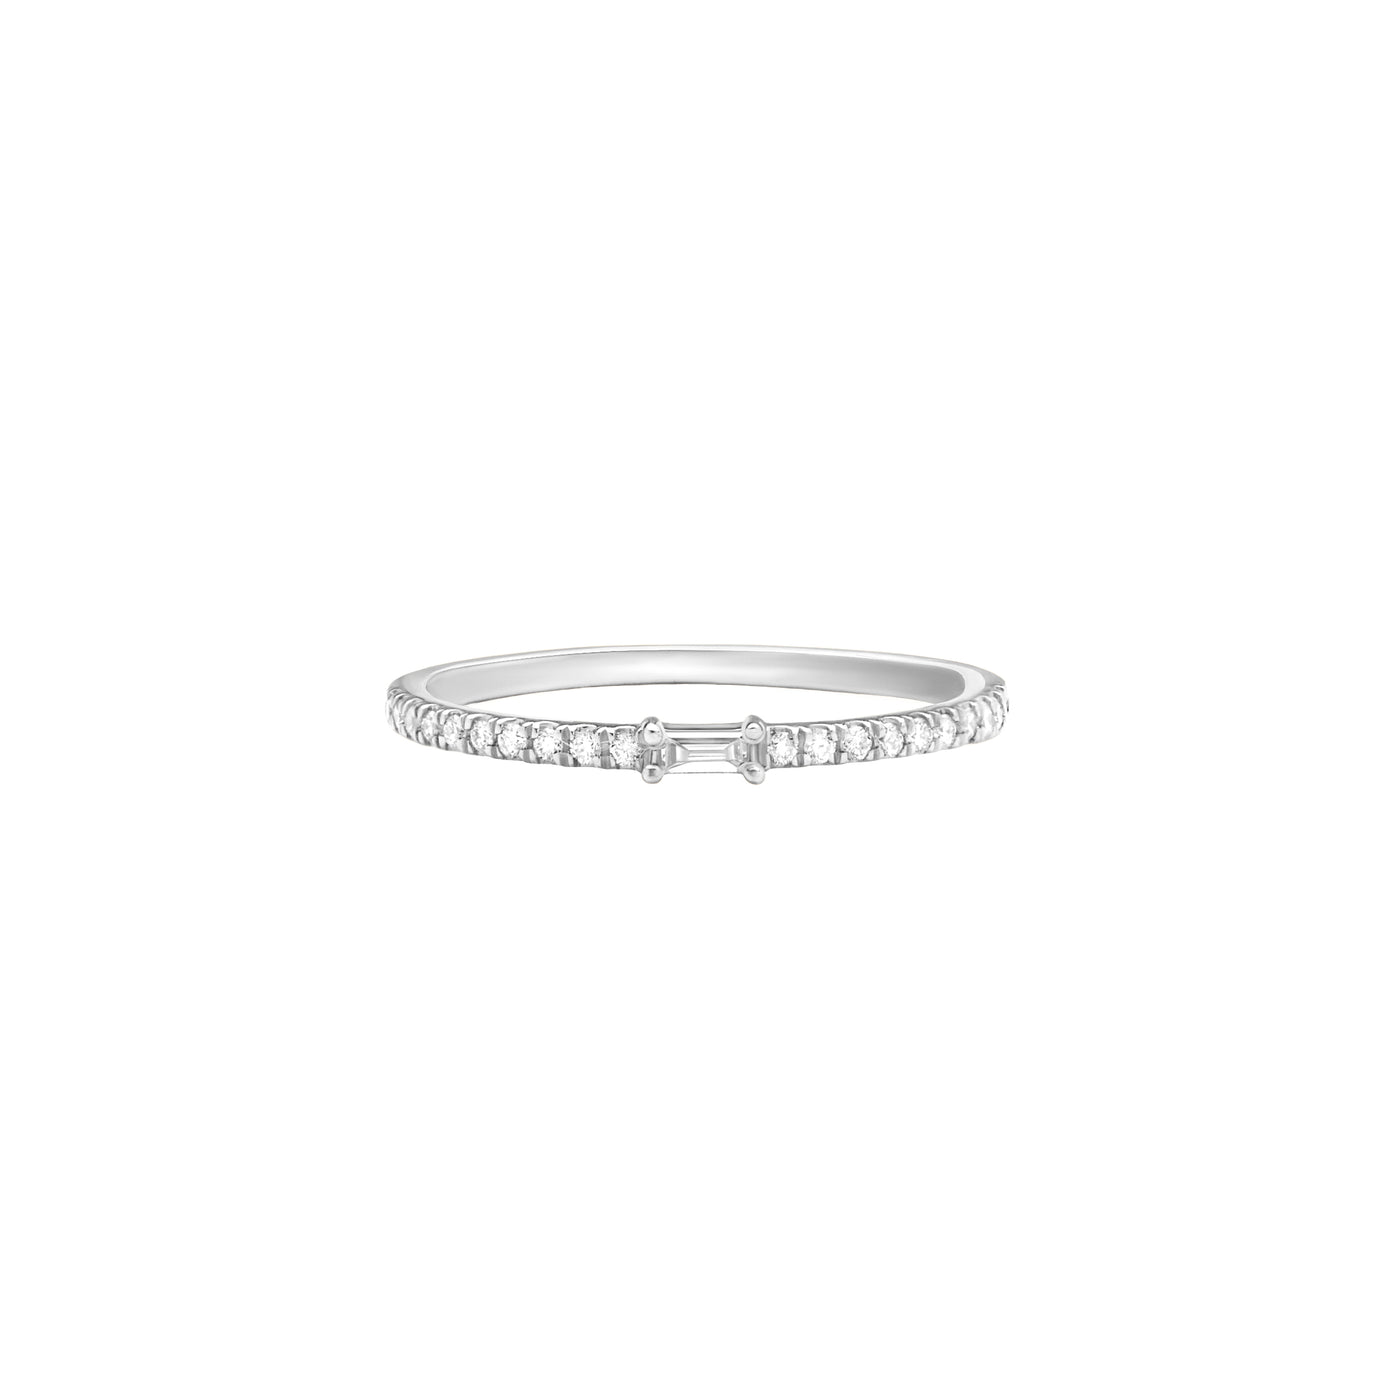 14 Karat White Gold Ring With Baguette Center Stone and One Row of Diamonds Against White Background